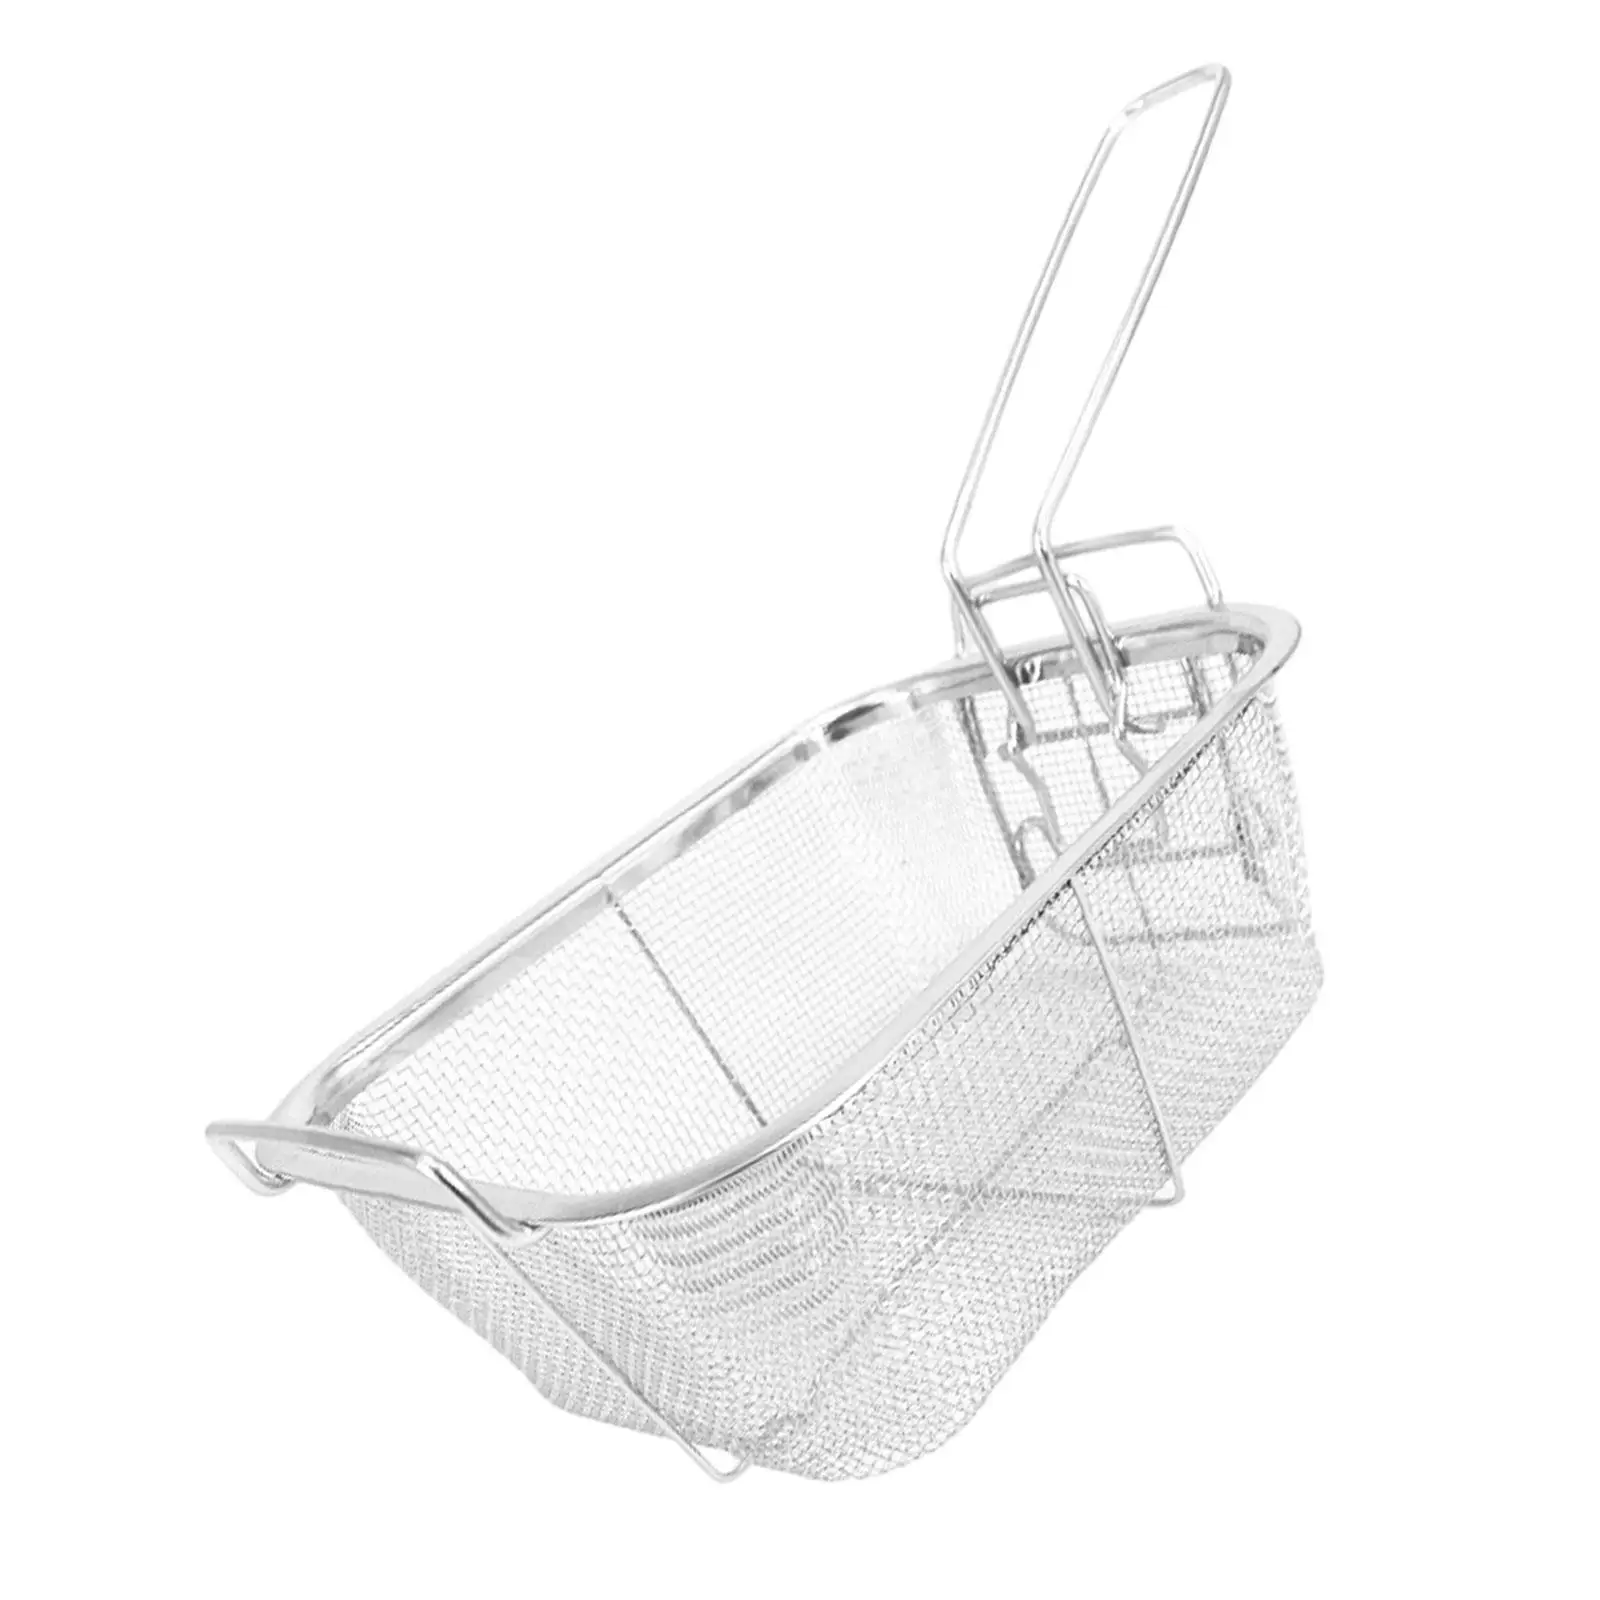 Mesh French Fry Chips Basket Fryer Basket Stainless Steel Fryer Basket for Potatoes Chips Chicken Wing Restaurant